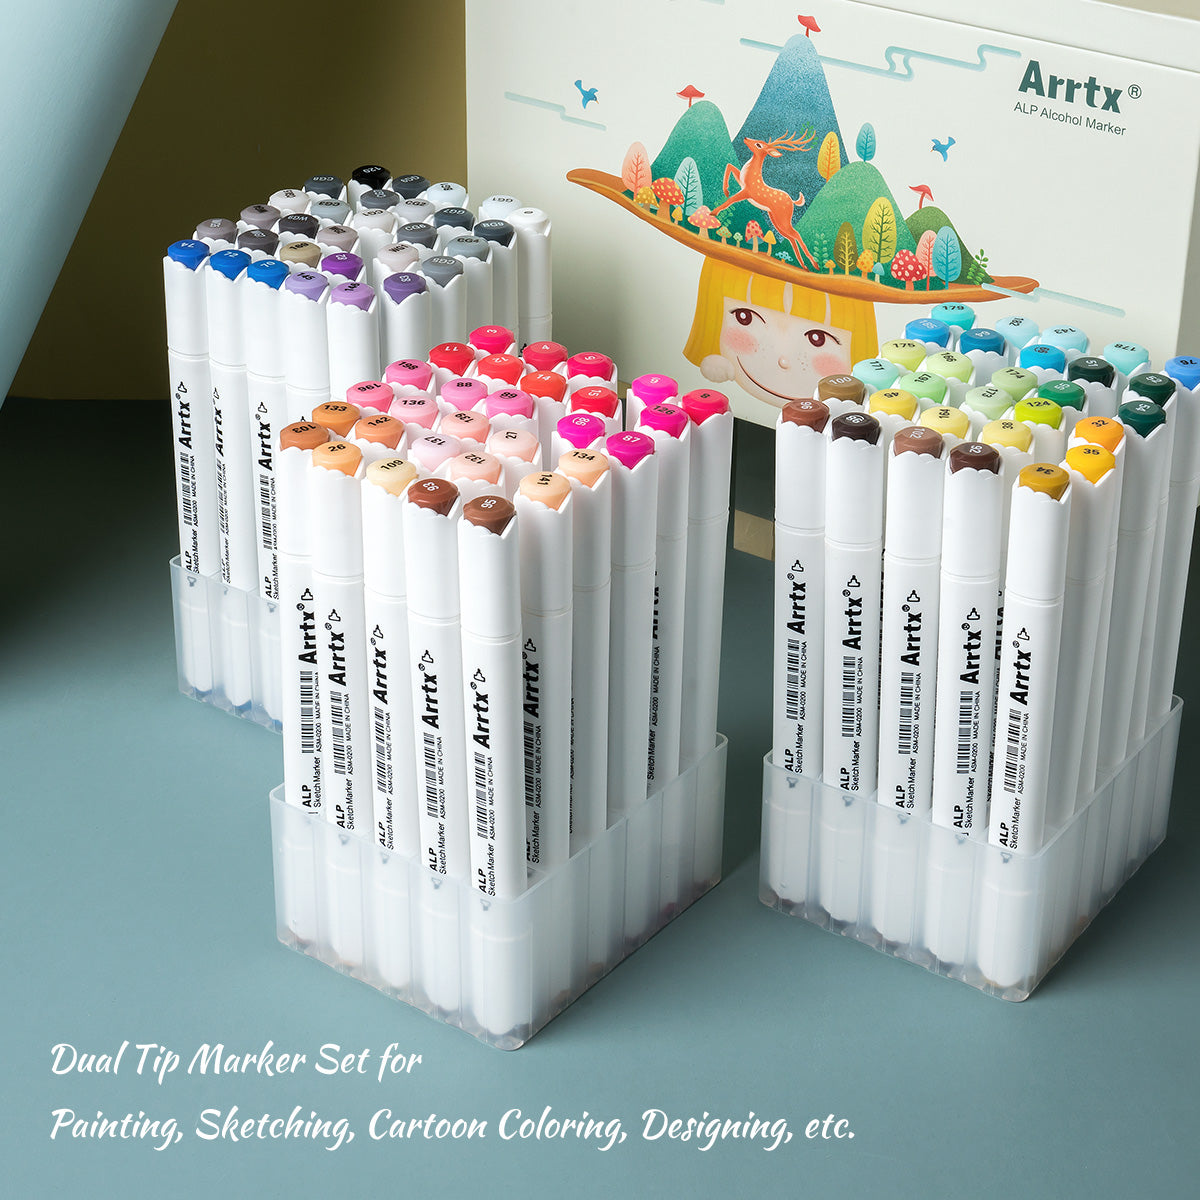 Arrtx Brush Markers, OROS 80 Colors Dual Tip Alcohol Markers